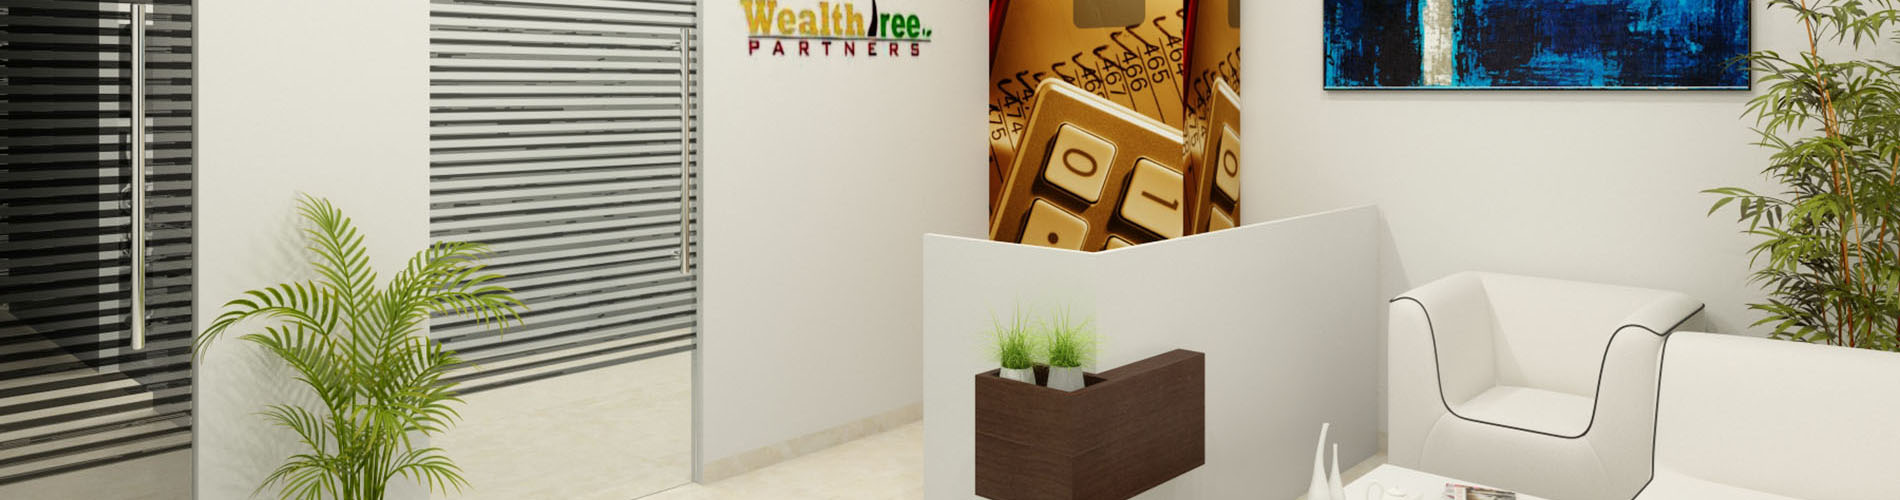 Corporate office of Wealth tree, includes Reception, Cafe, Cabin, Workstation